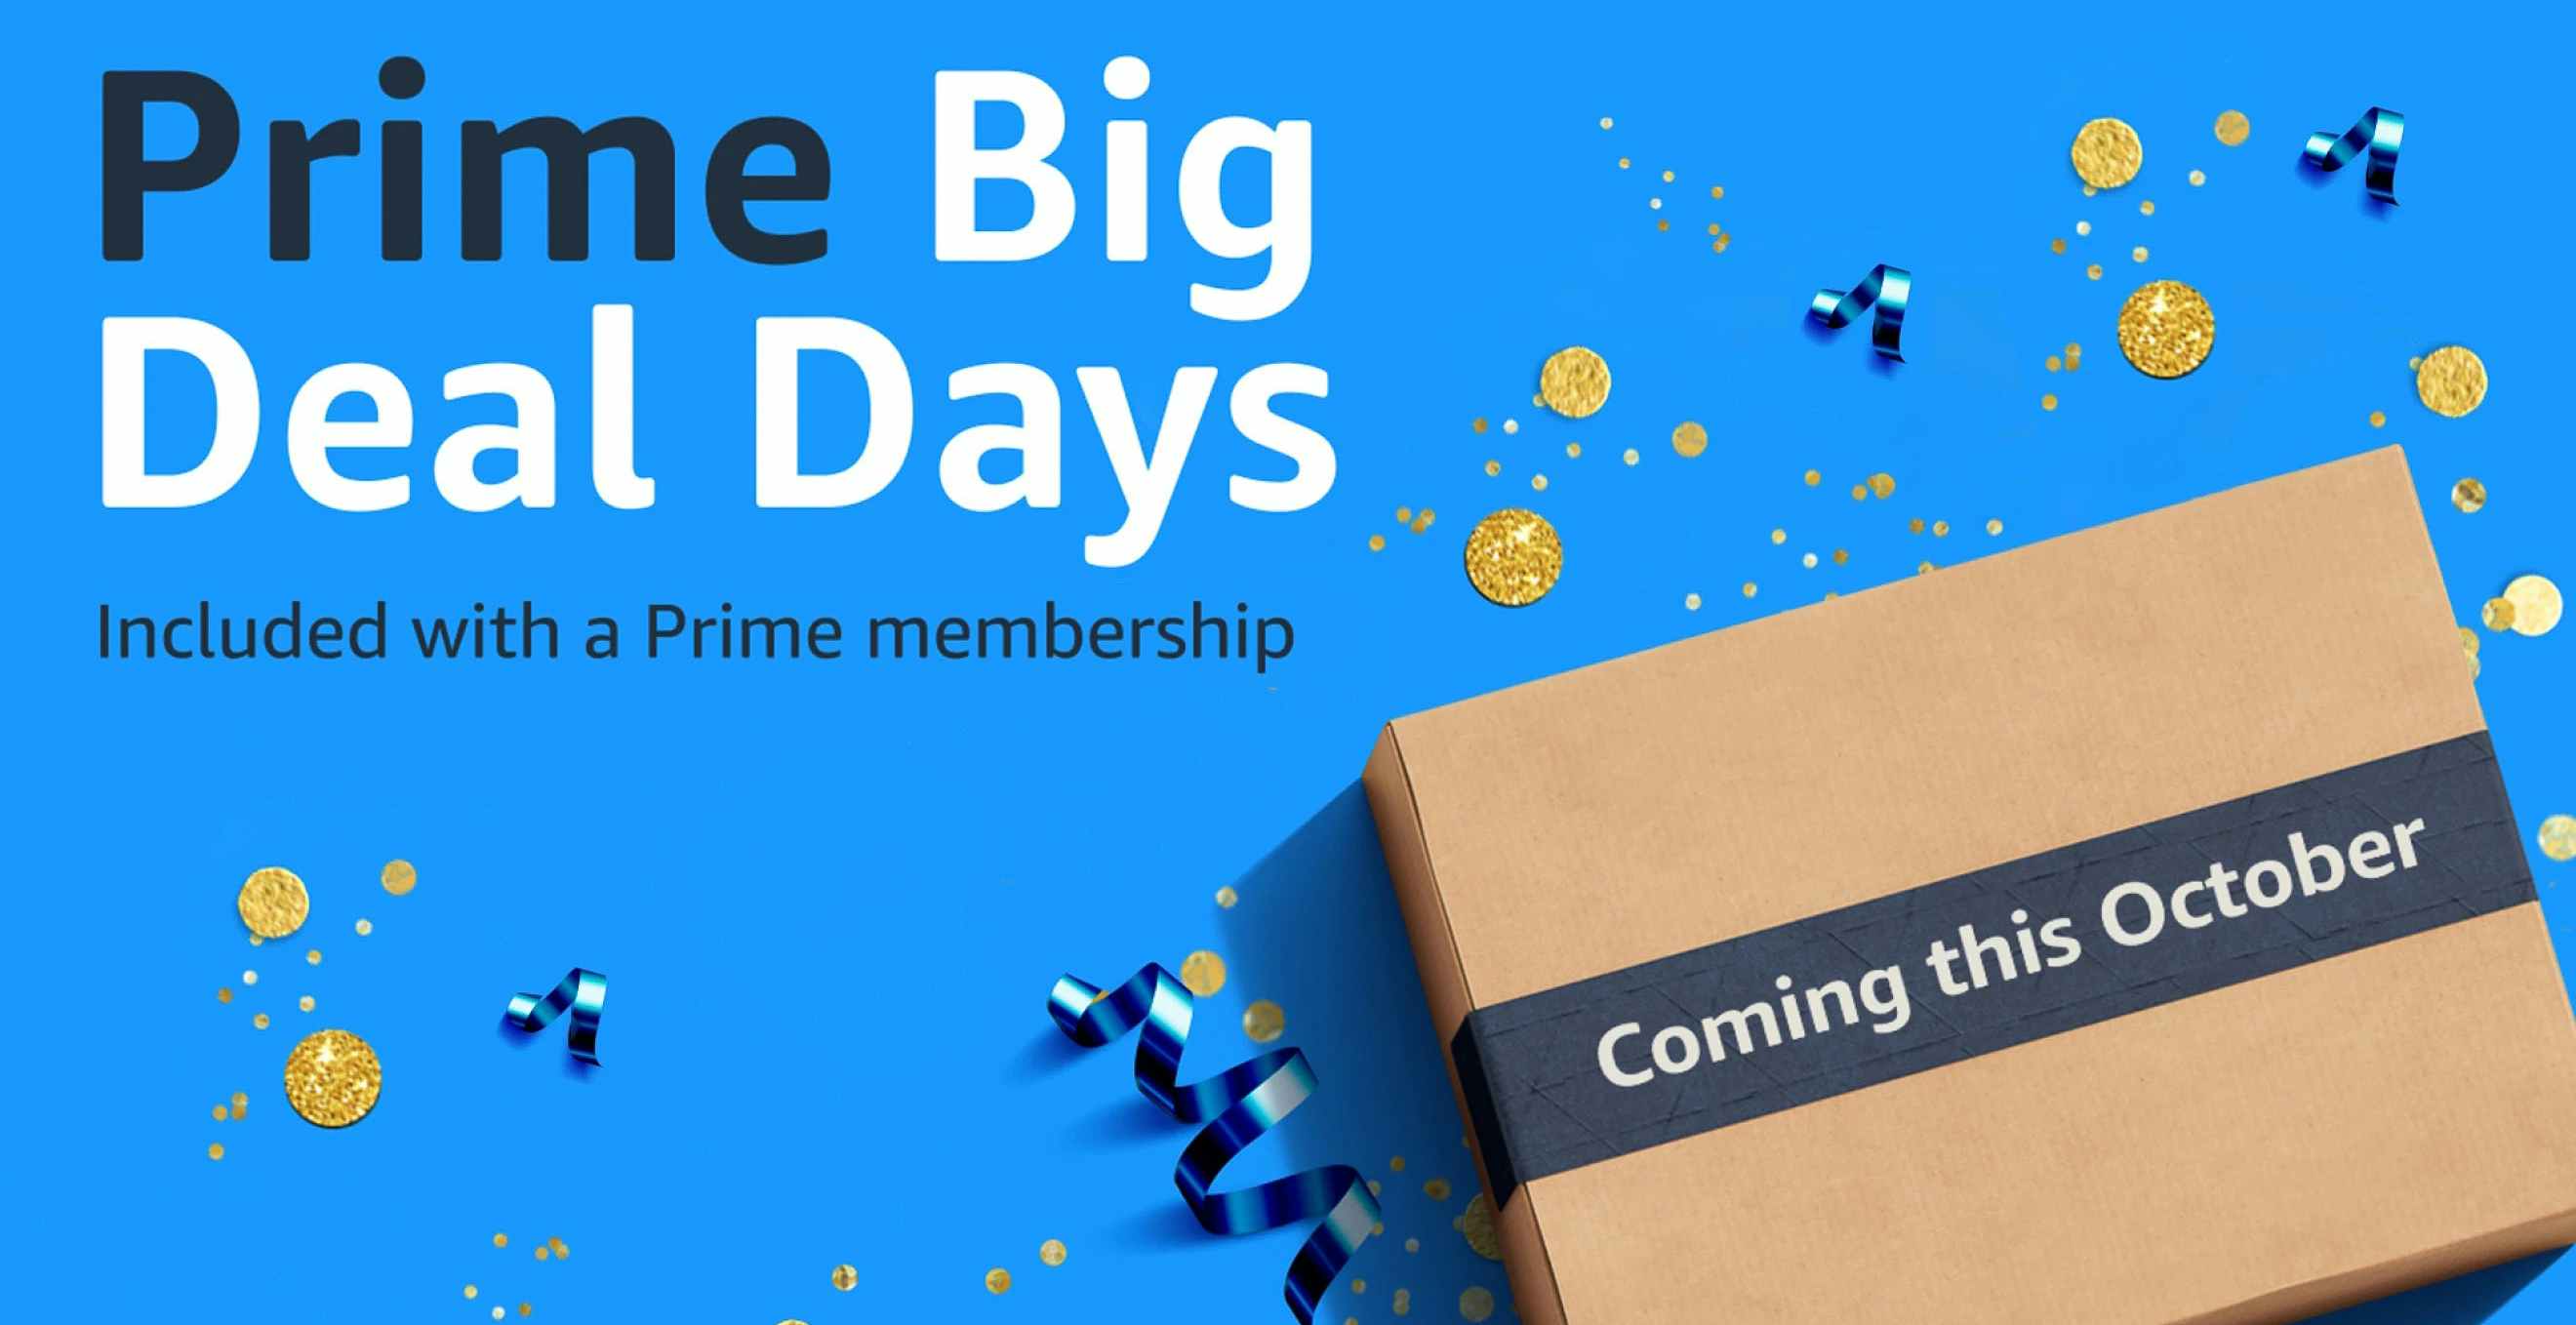 An Amazon advertisement banner for the Prime Big Deal Days coming in October